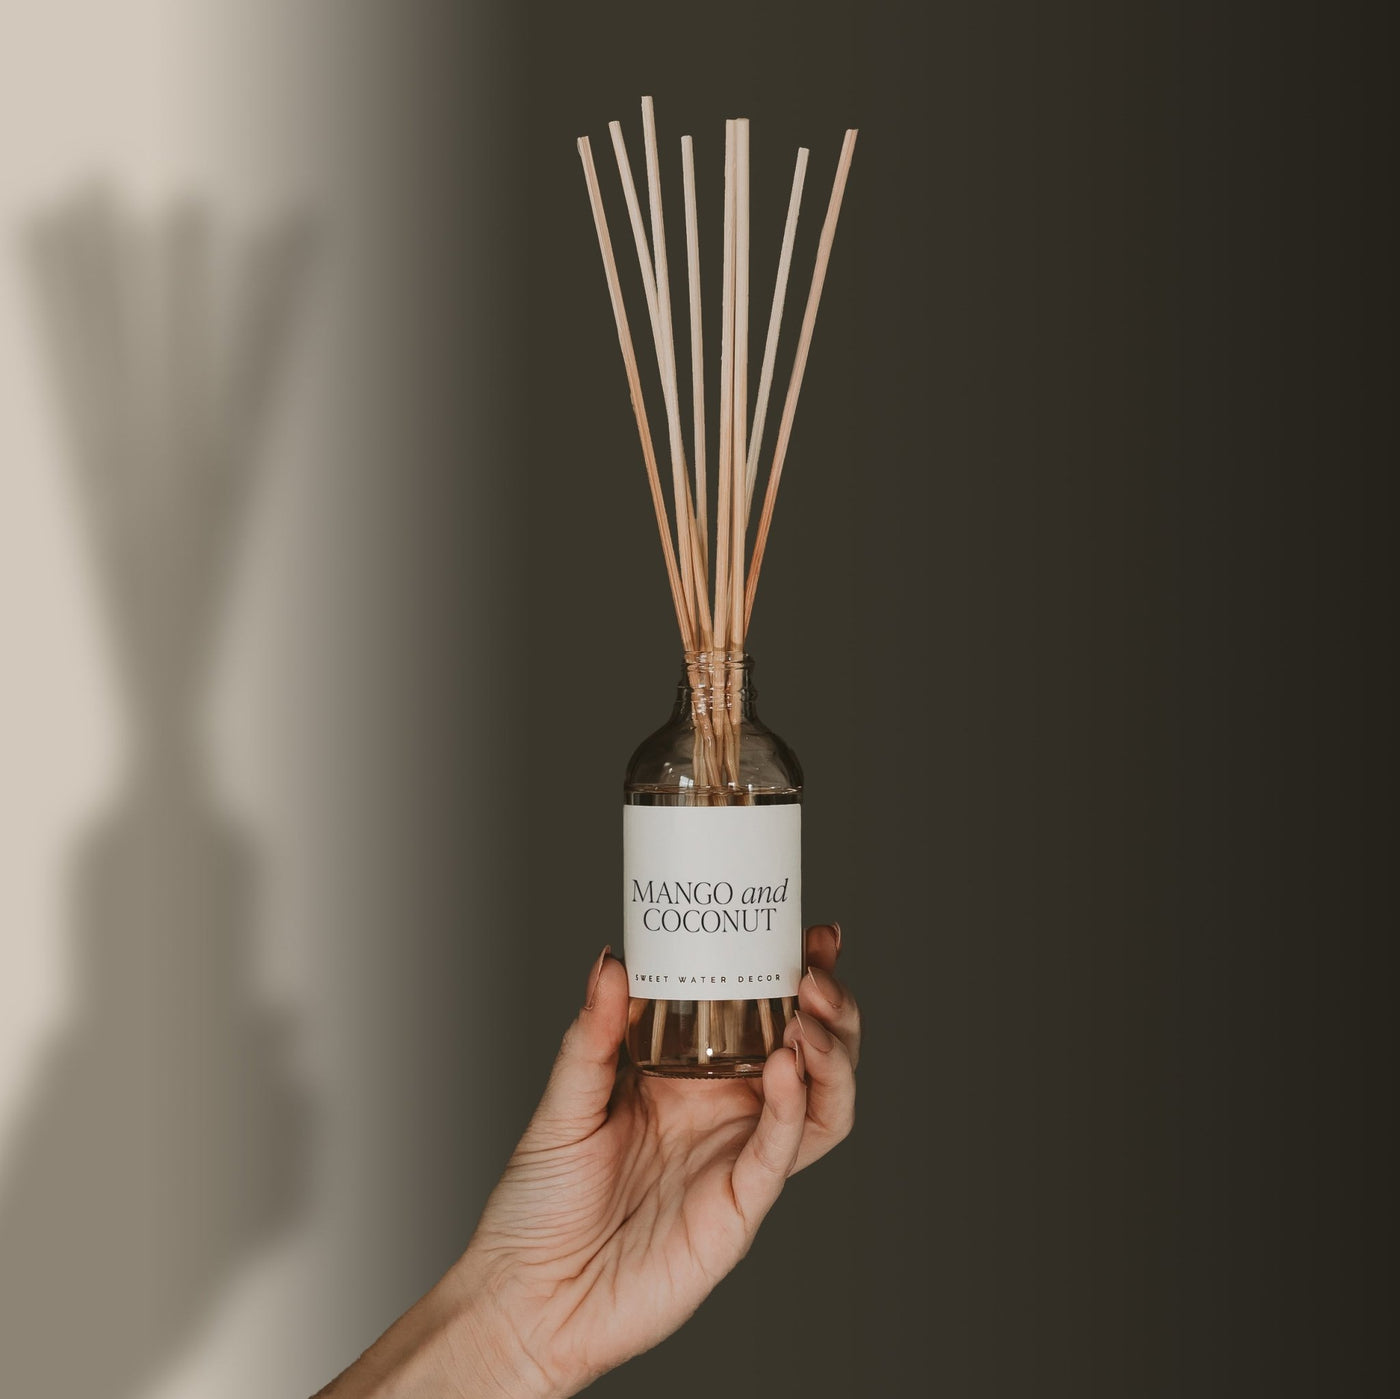 Mango and Coconut Clear Reed Diffuser - Sweet Water Decor - Reed Diffusers